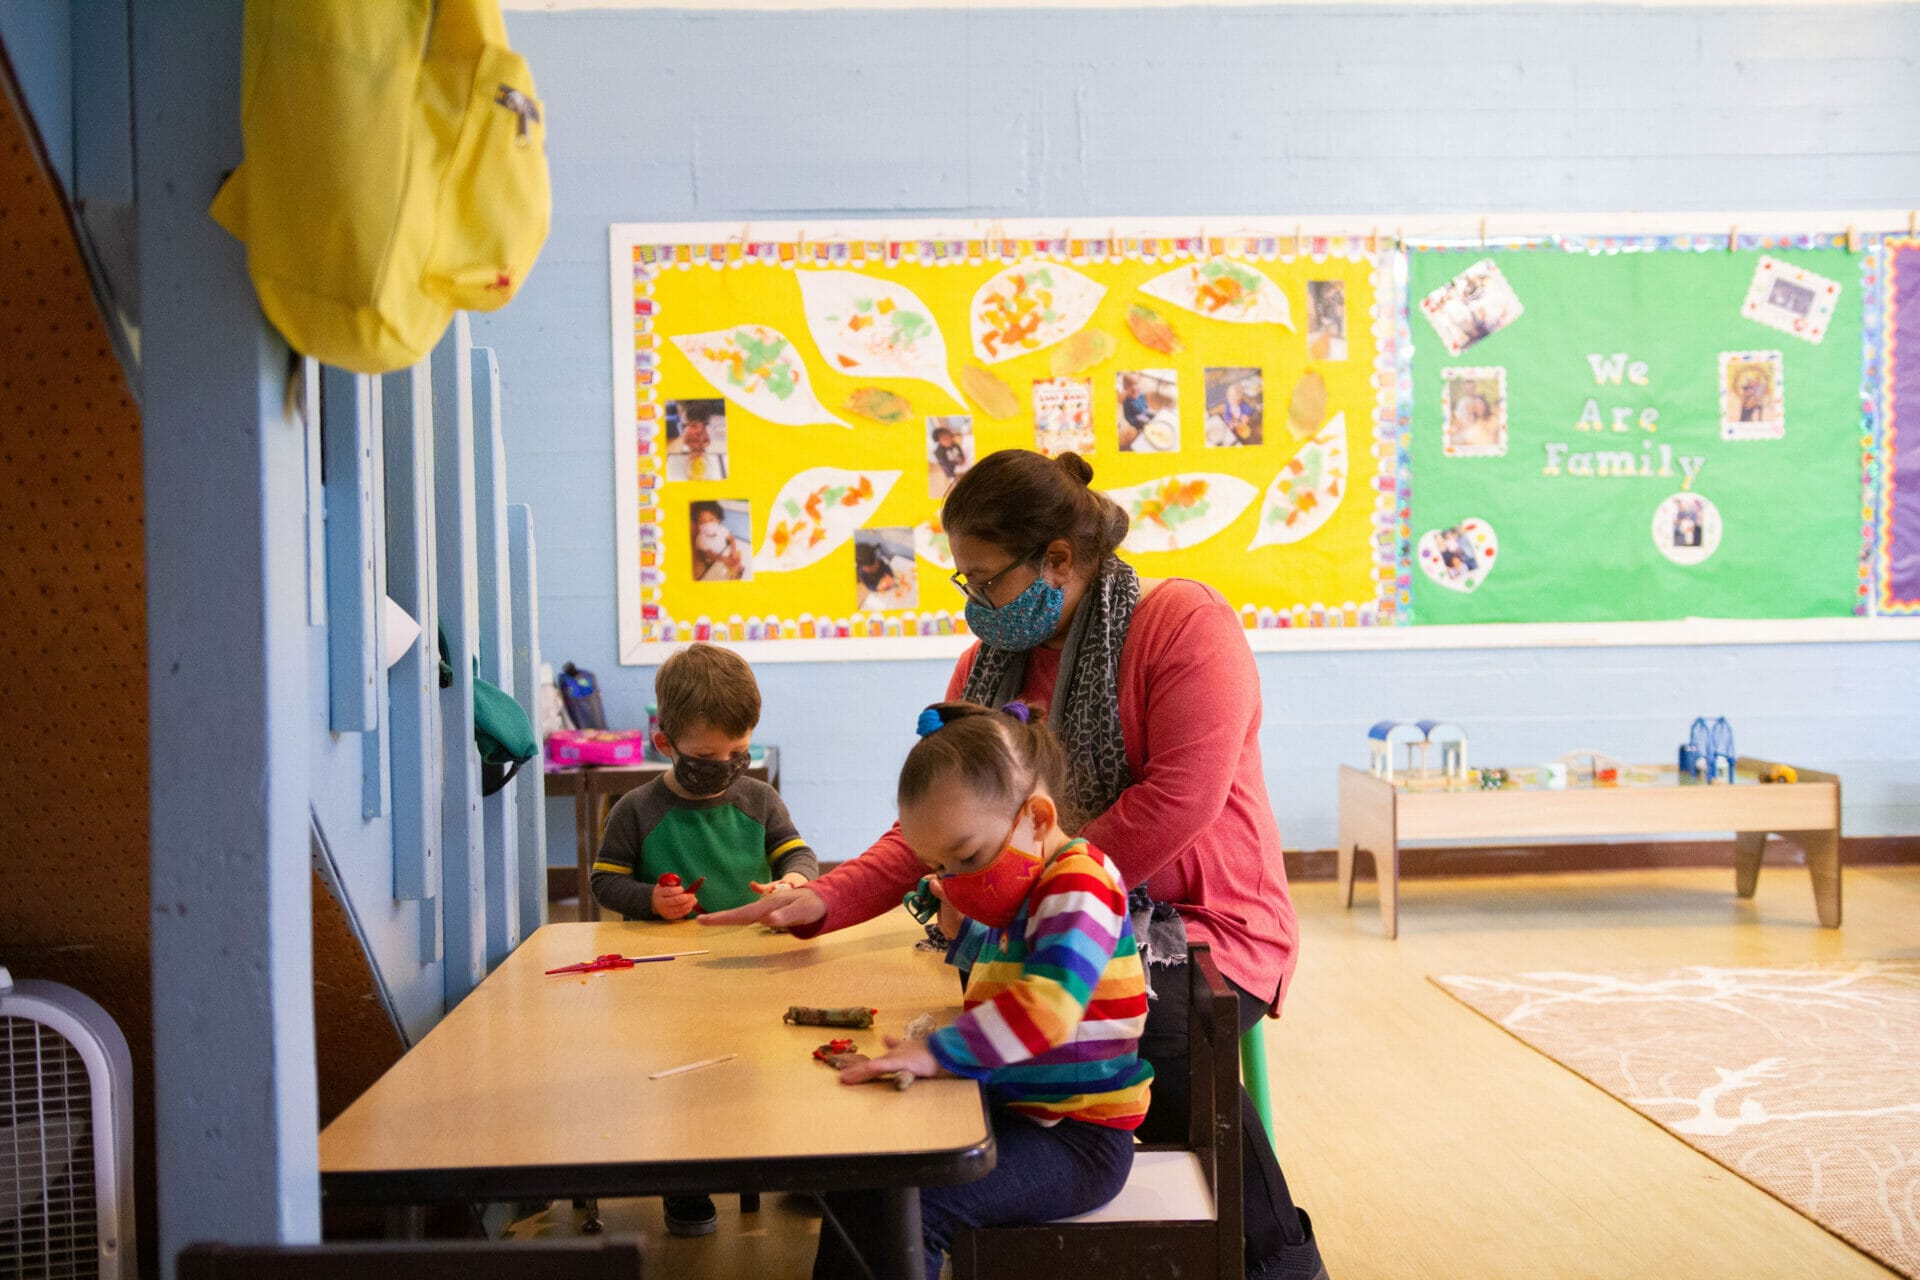 Masked early educator assisting two students on an activity inside a classroom